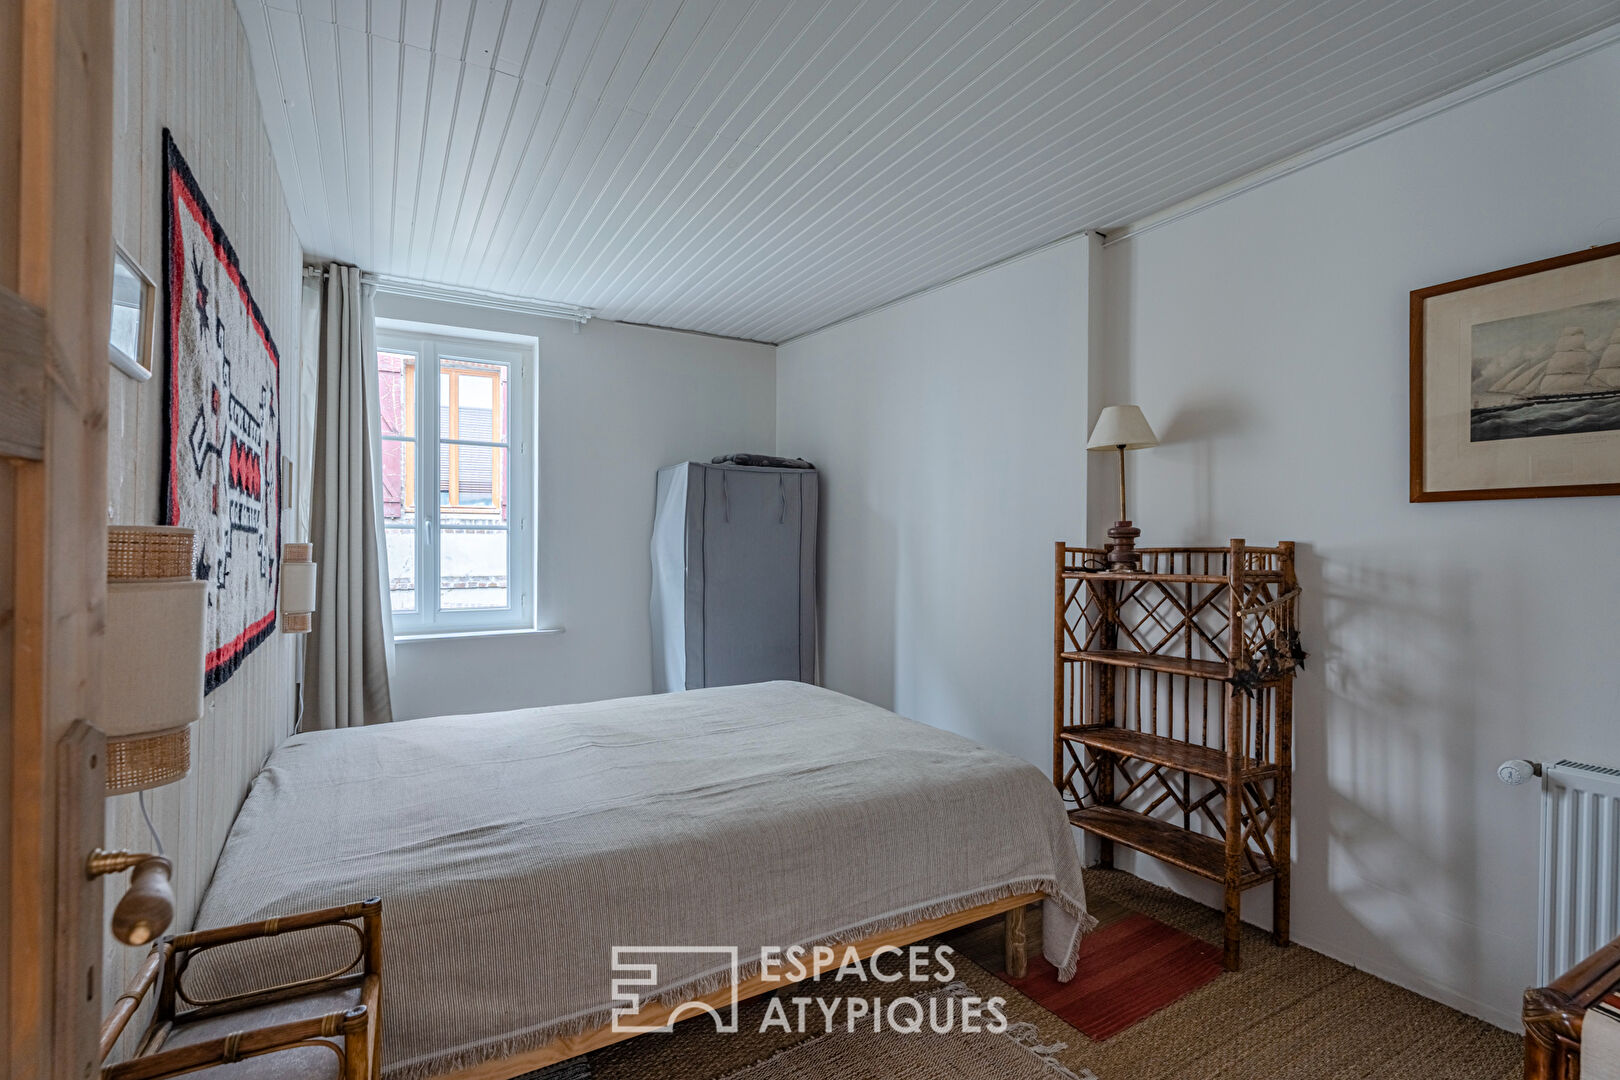 Former artist’s studio revisited in a loft in the historic center of Honfleur